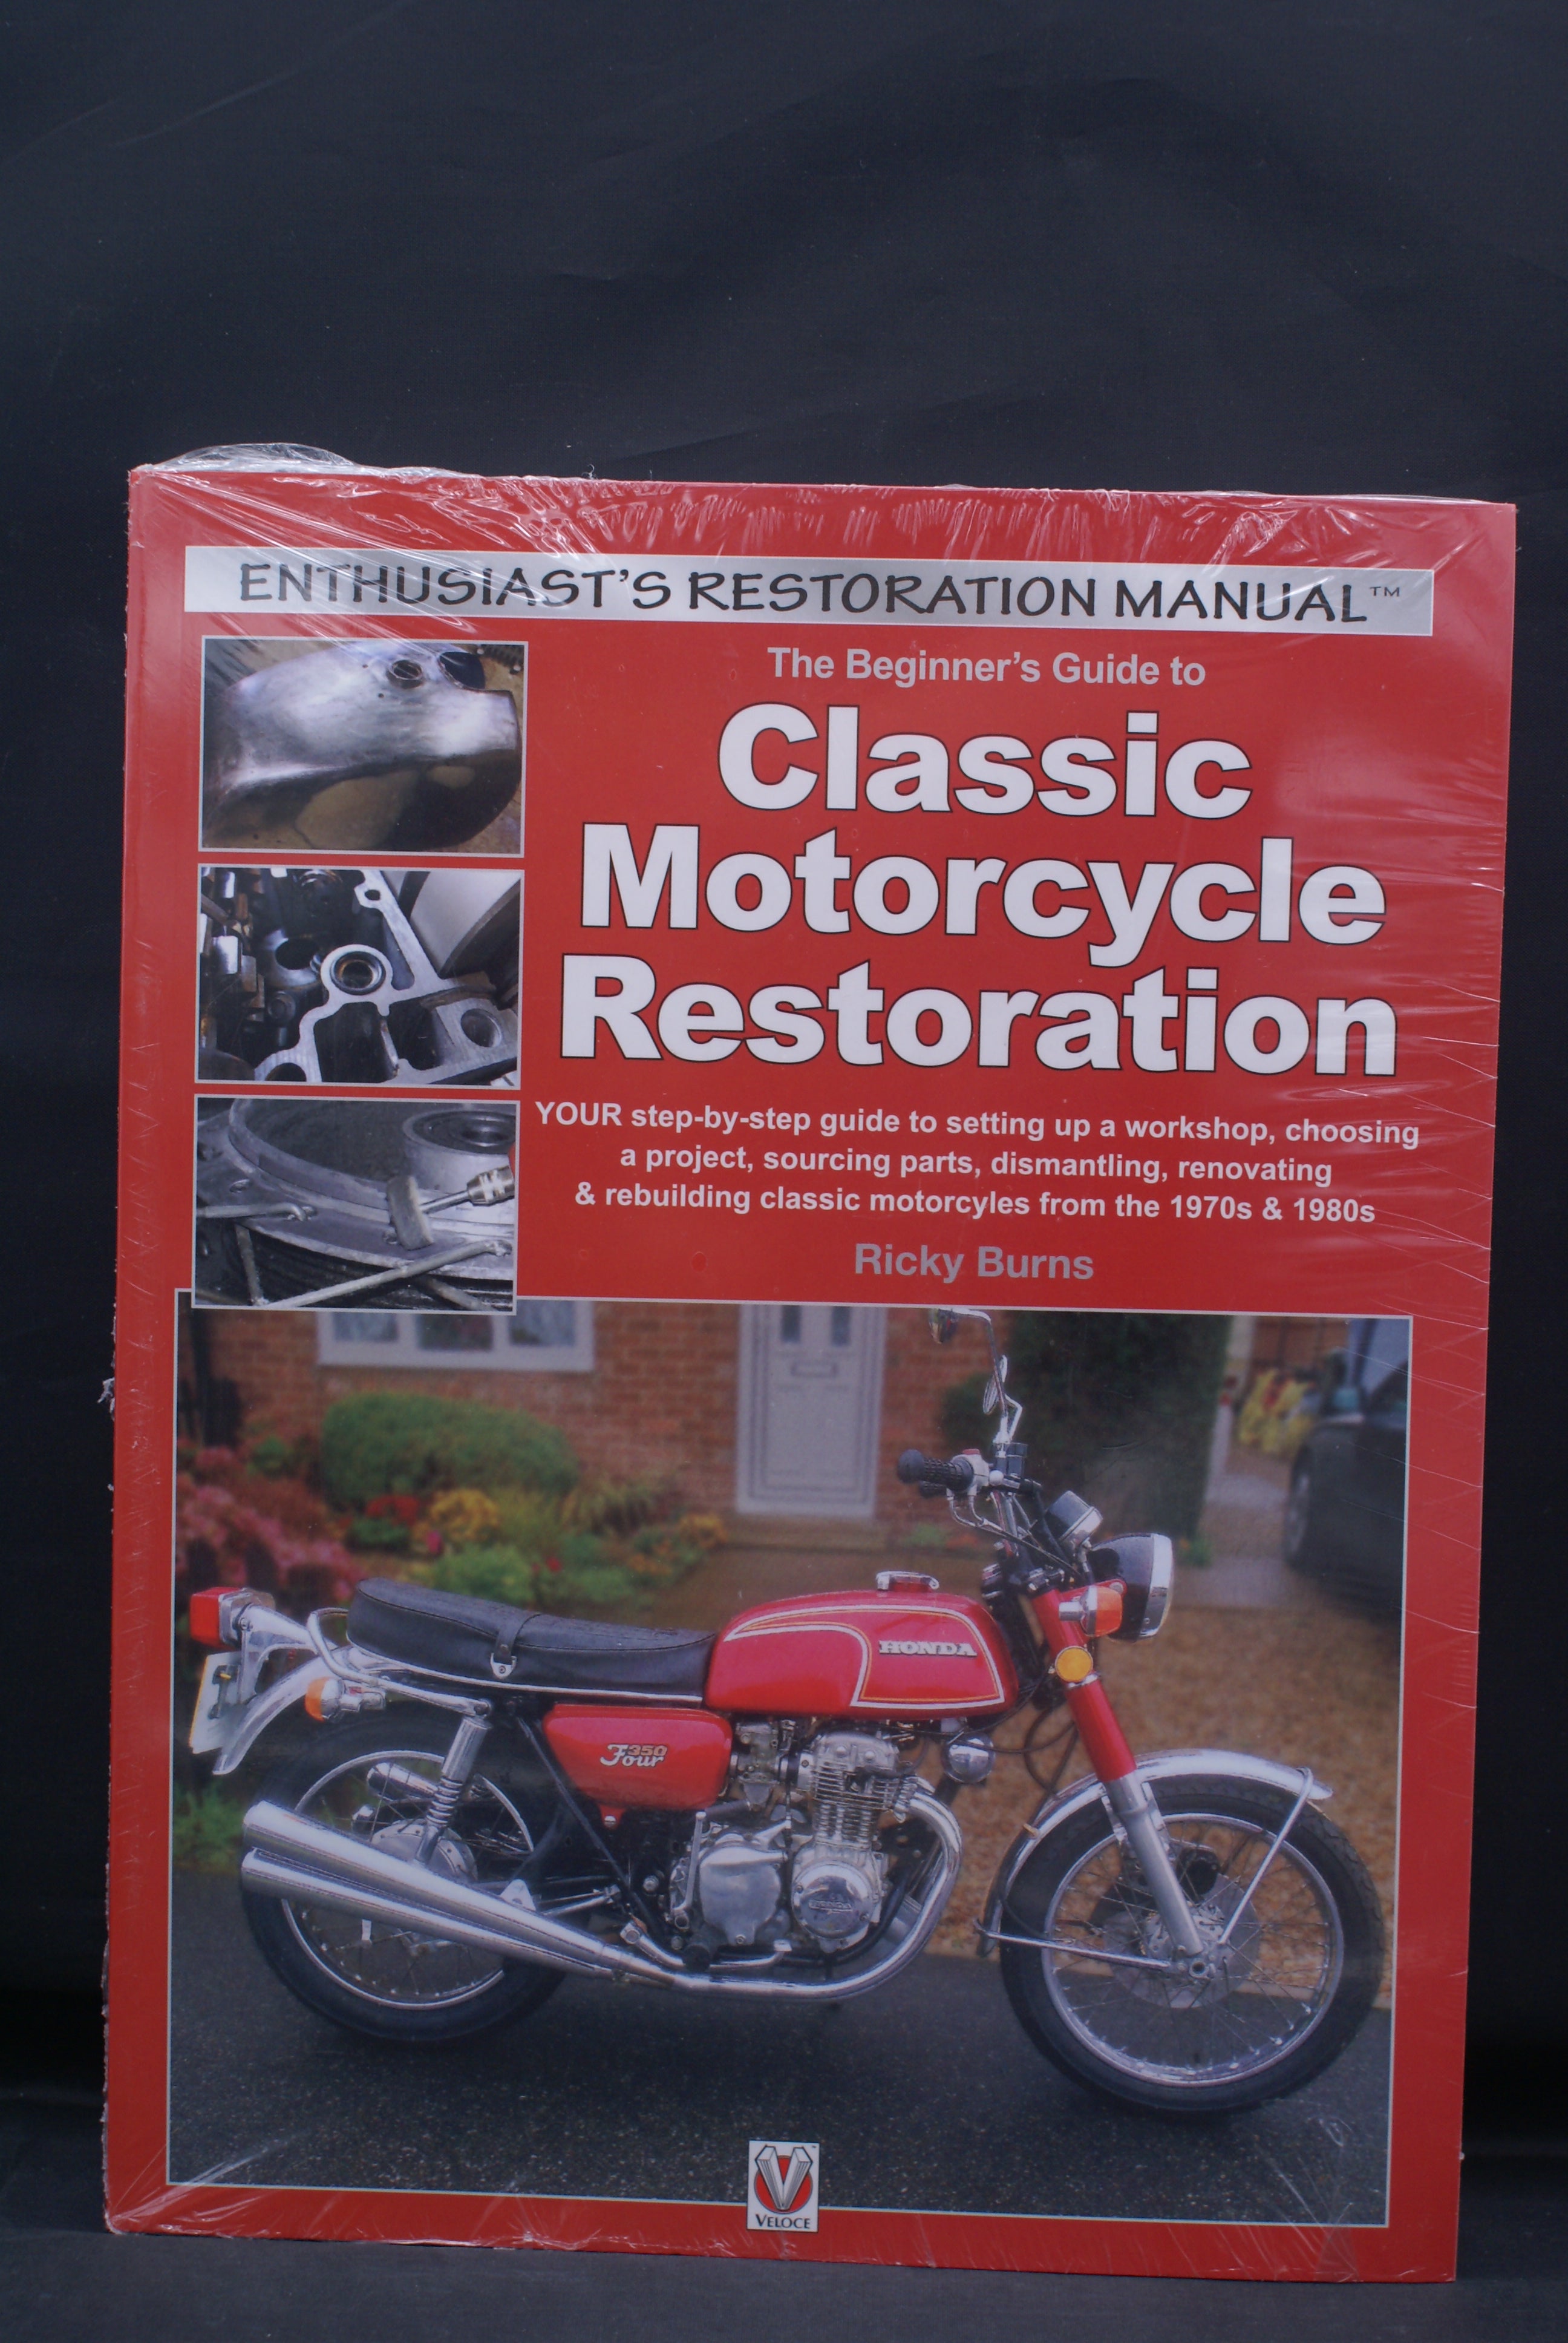 Classic Motorcycle Restoration guide